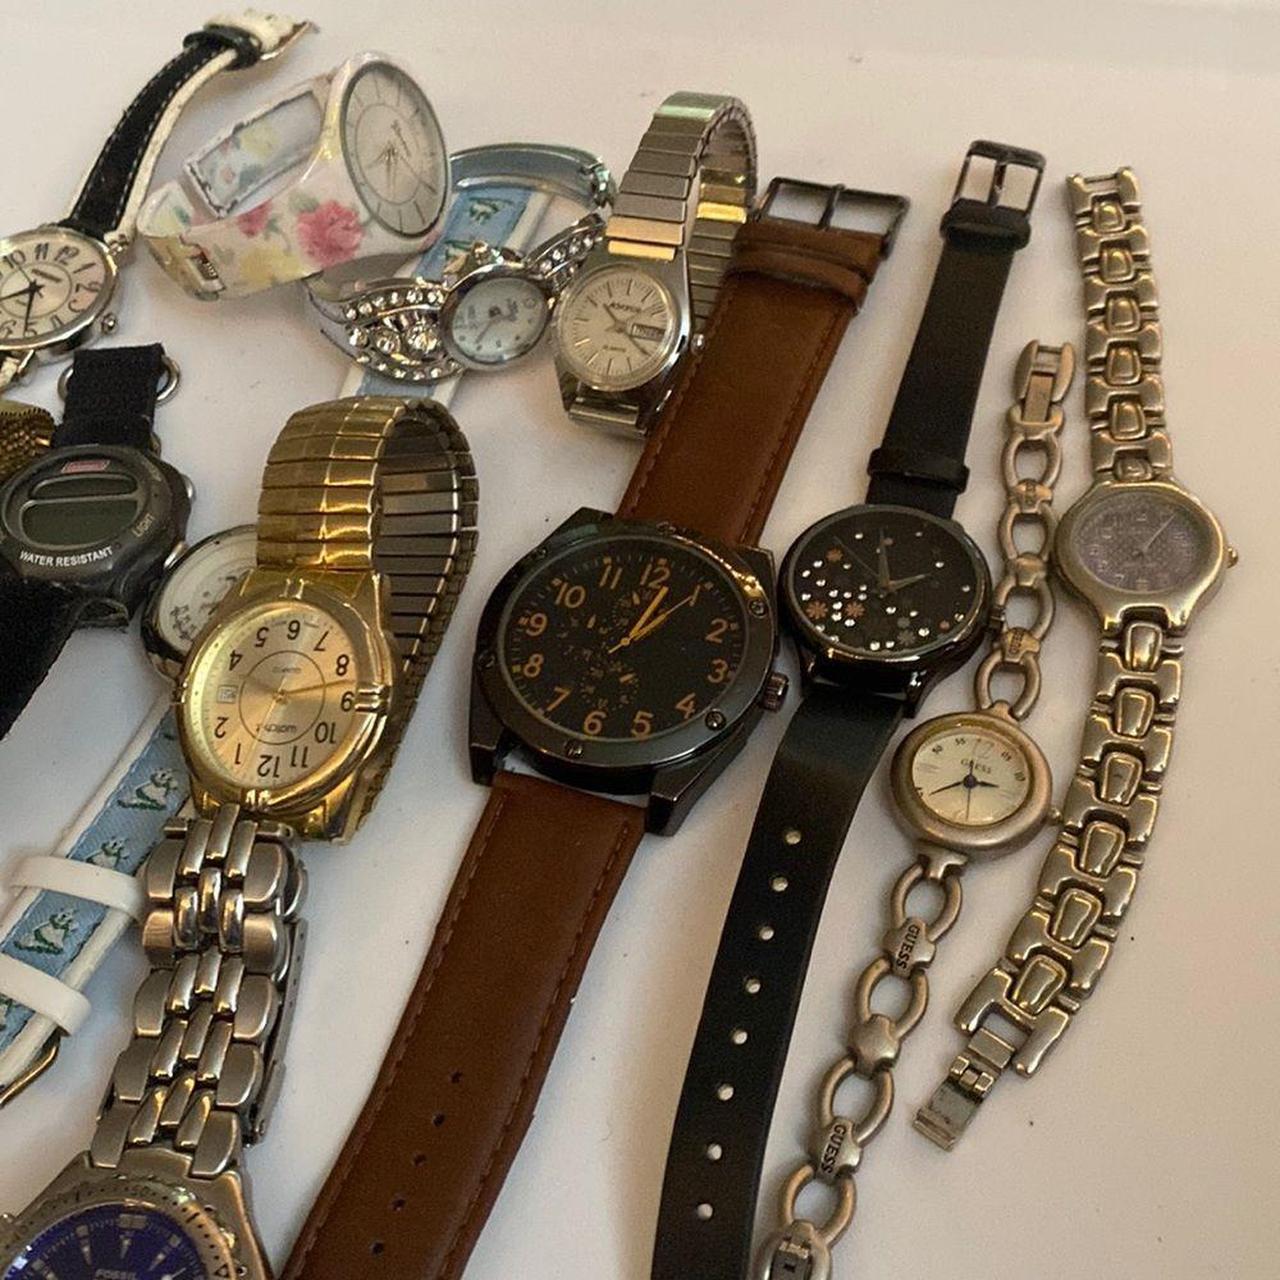 Product Image 2 - Watches come in various conditions.